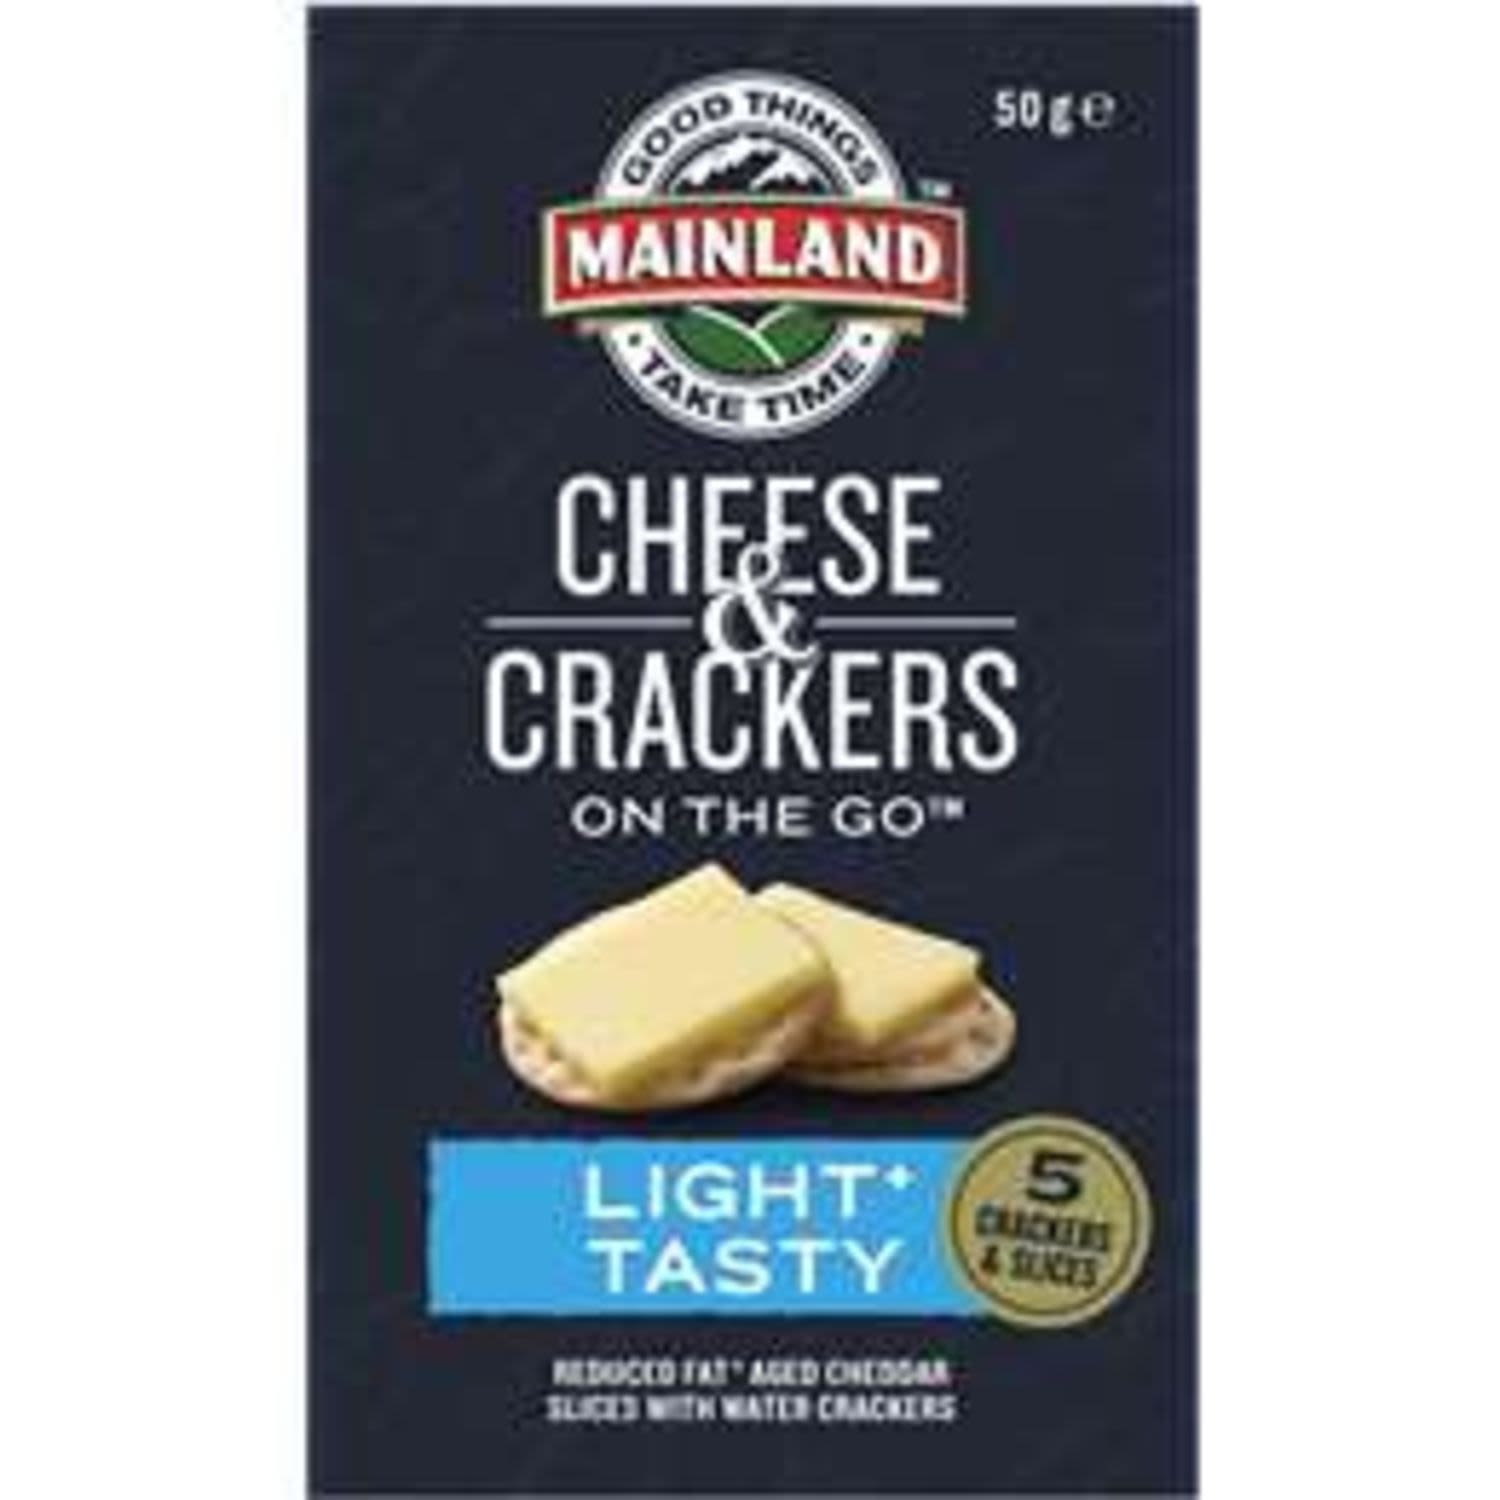 Mainland Light Tasty Cheddar Cheese with Water Crackers, 50 Gram